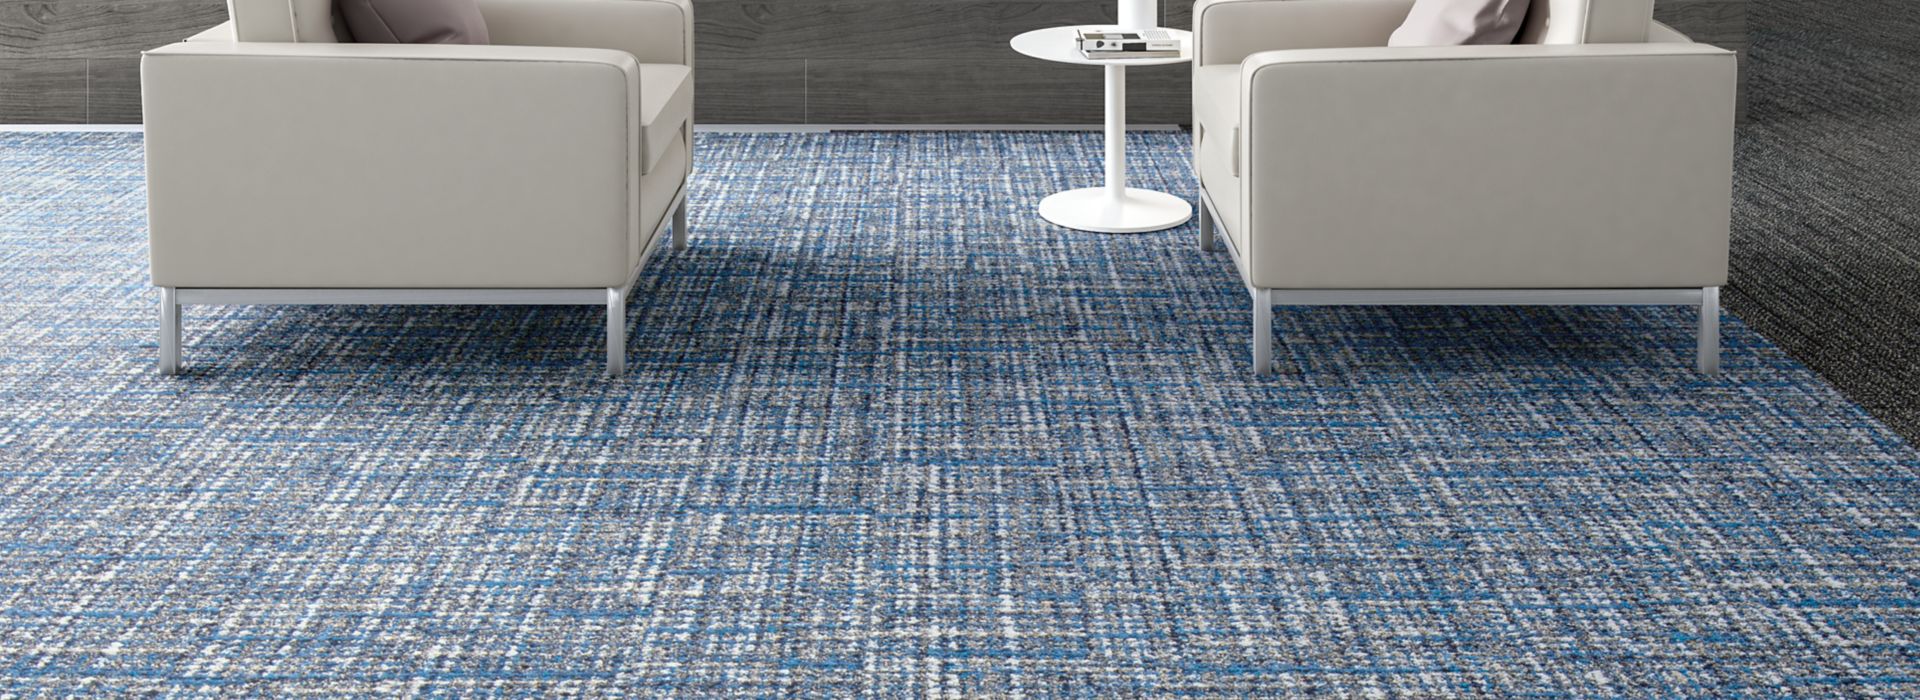 Interface WW895 plank carpet tile in lobby area with couches and side table 